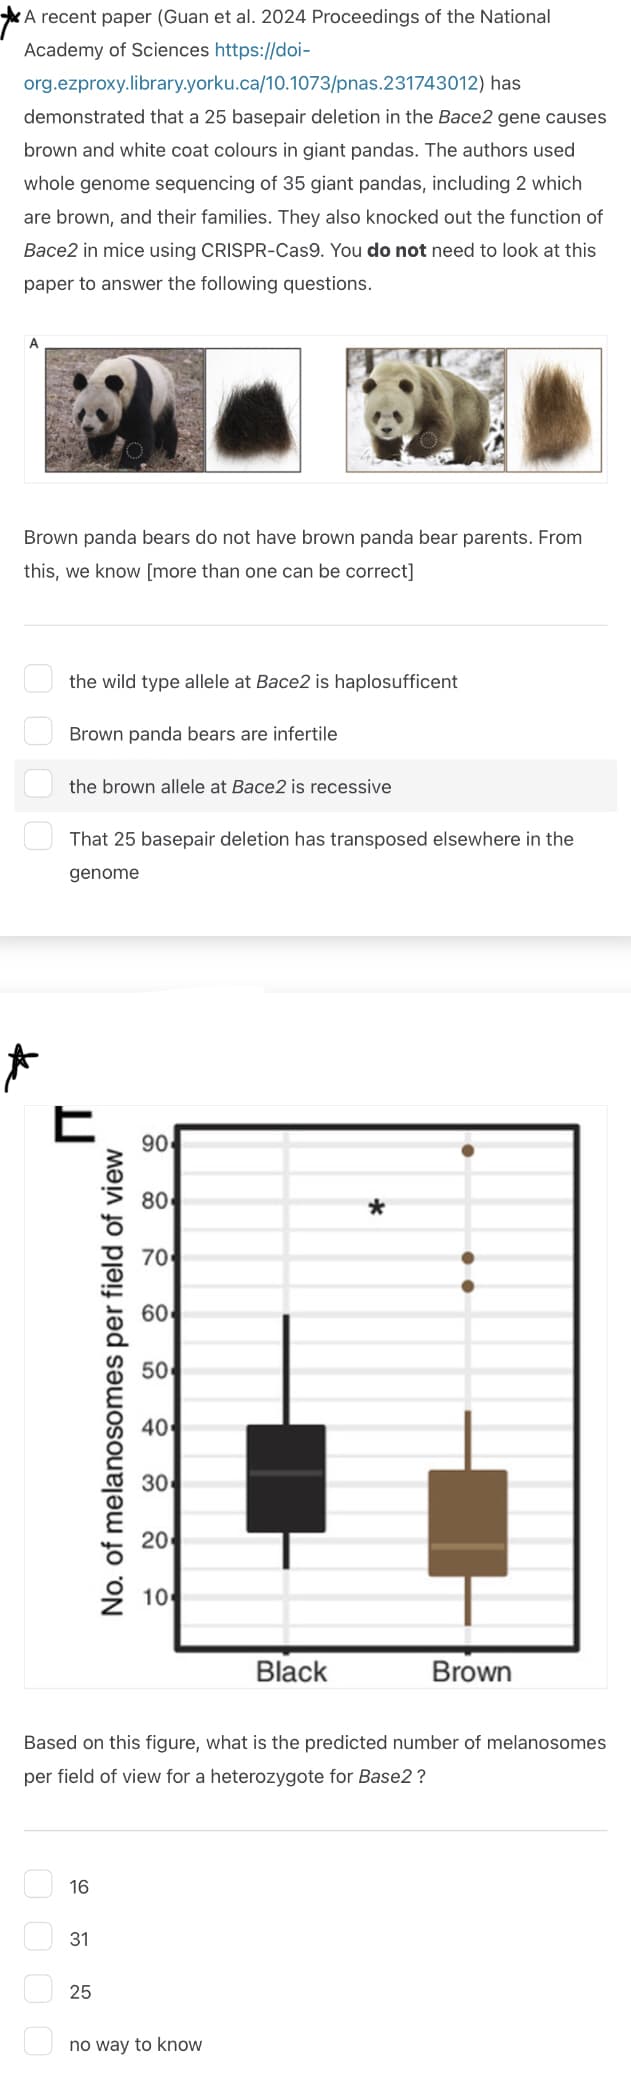 A recent paper (Guan et al. 2024 Proceedings of the National
Academy of Sciences https://doi-
org.ezproxy.library.yorku.ca/10.1073/pnas.231743012)
has
demonstrated that a 25 basepair deletion in the Bace2 gene causes
brown and white coat colours in giant pandas. The authors used
whole genome sequencing of 35 giant pandas, including 2 which
are brown, and their families. They also knocked out the function of
Bace2 in mice using CRISPR-Cas9. You do not need to look at this
paper to answer the following questions.
Brown panda bears do not have brown panda bear parents. From
this, we know [more than one can be correct]
0000
the wild type allele at Bace2 is haplosufficent
Brown panda bears are infertile
the brown allele at Bace2 is recessive
That 25 basepair deletion has transposed elsewhere in the
genome
Է
No. of melanosomes per field of view
90
40
30
20
8 ཆེ ཥཾ  ྃ  ྴ སྐྱེ à ྜ
80
70
60
50
은 100
Black
*
Brown
Based on this figure, what is the predicted number of melanosomes
per field of view for a heterozygote for Base2?
0000
16
31
25
no way to know